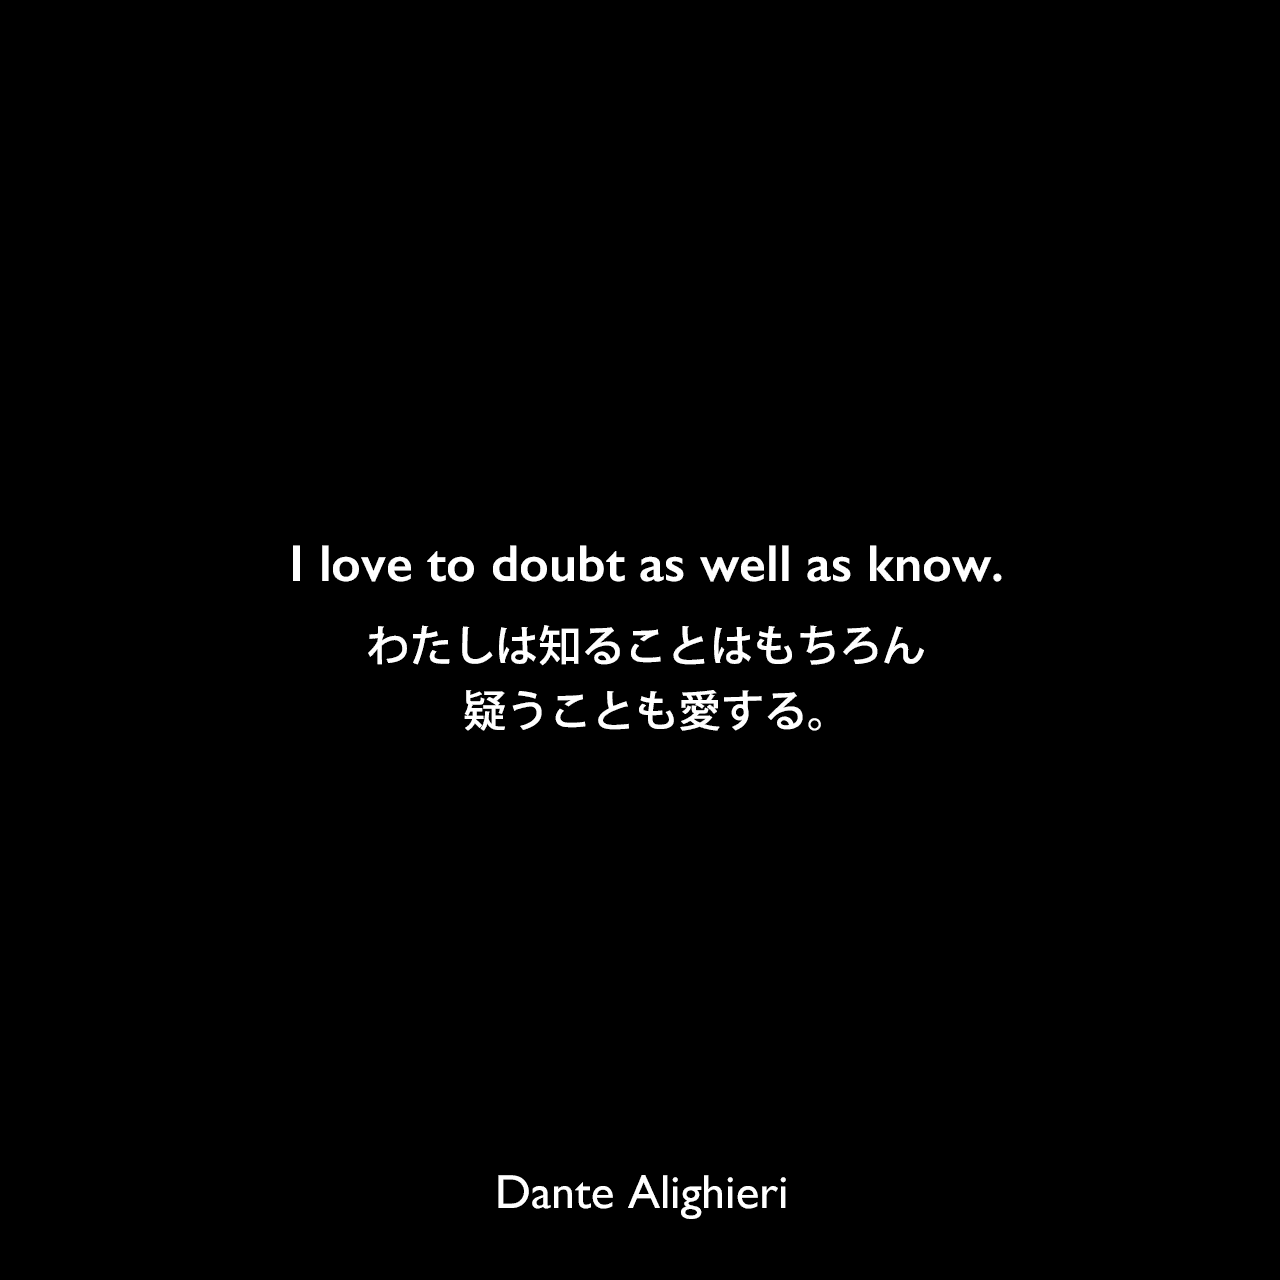 I love to doubt as well as know.わたしは知ることはもちろん、疑うことも愛する。